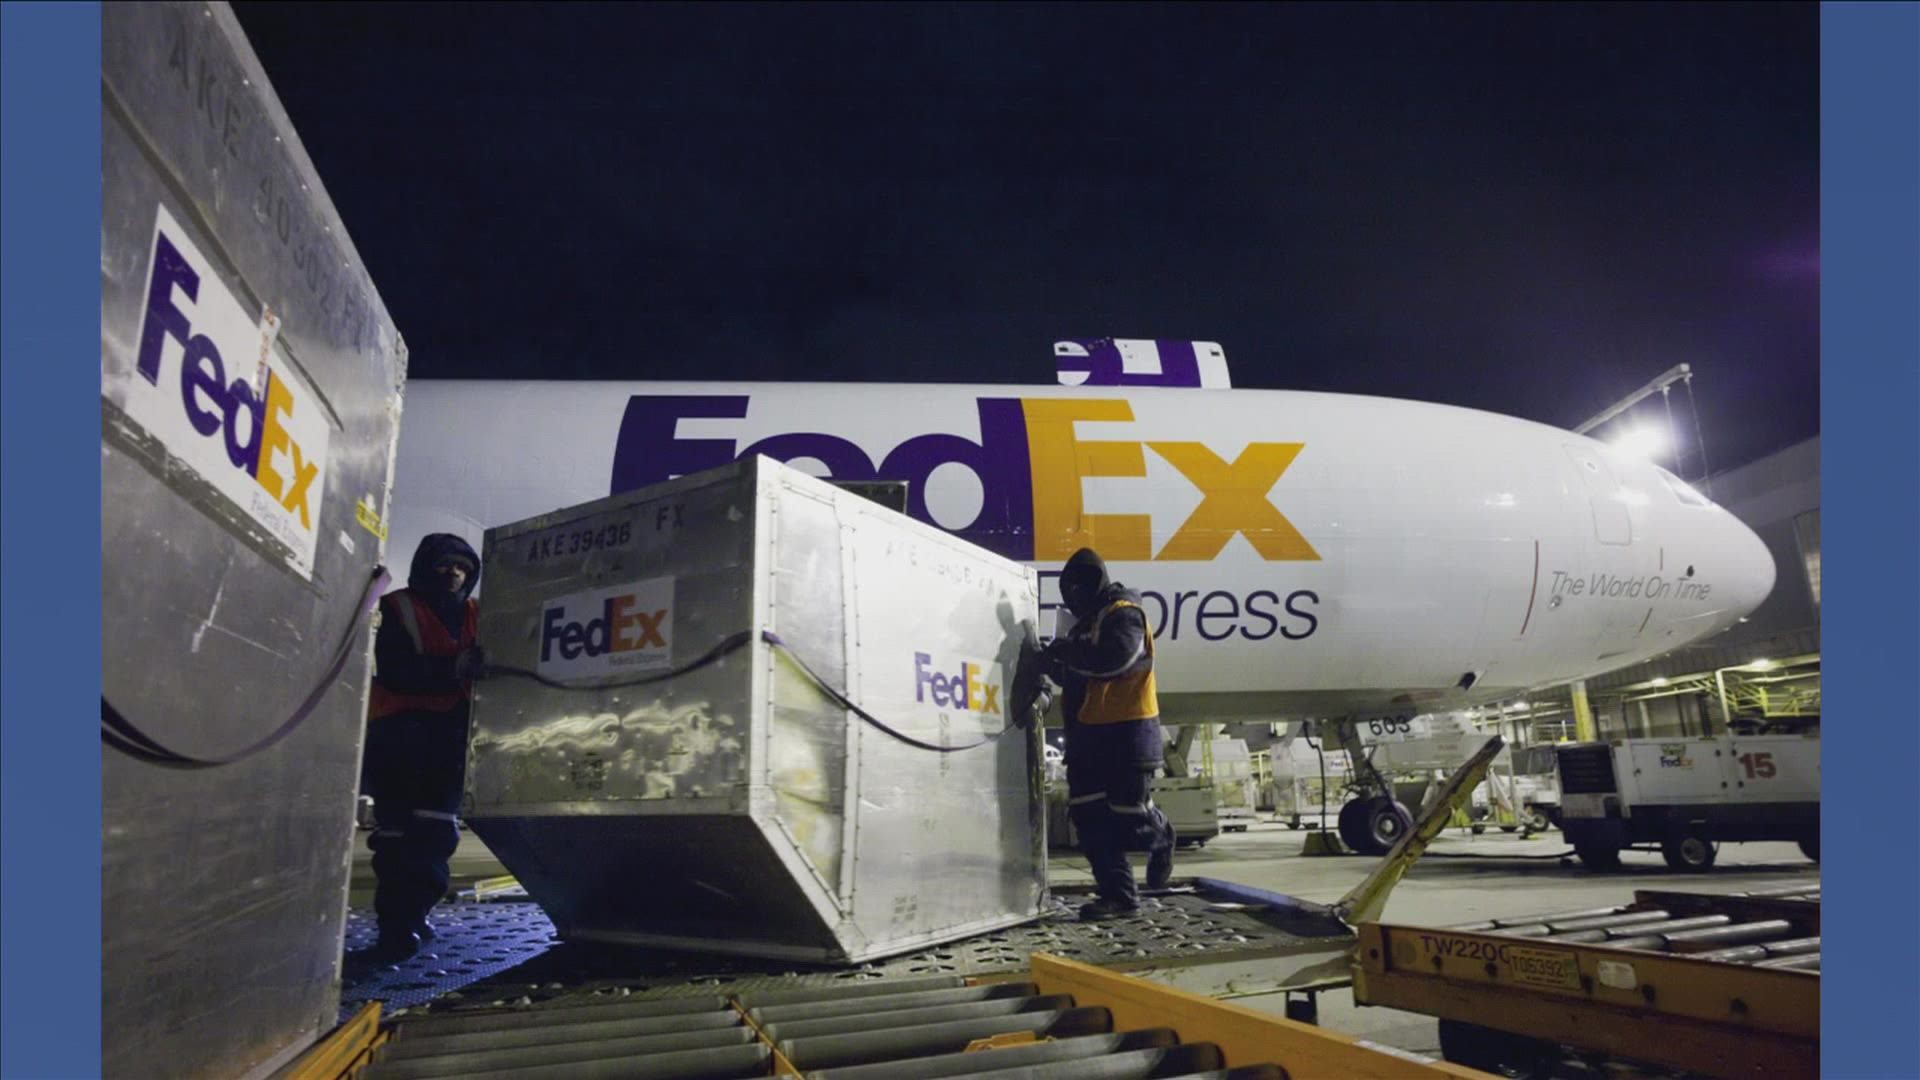 FedEx announced Chairman and CEO Fred Smith will be stepping into the role of Executive Chairman June 1. Company COO Raj Subramaniam will take his place.